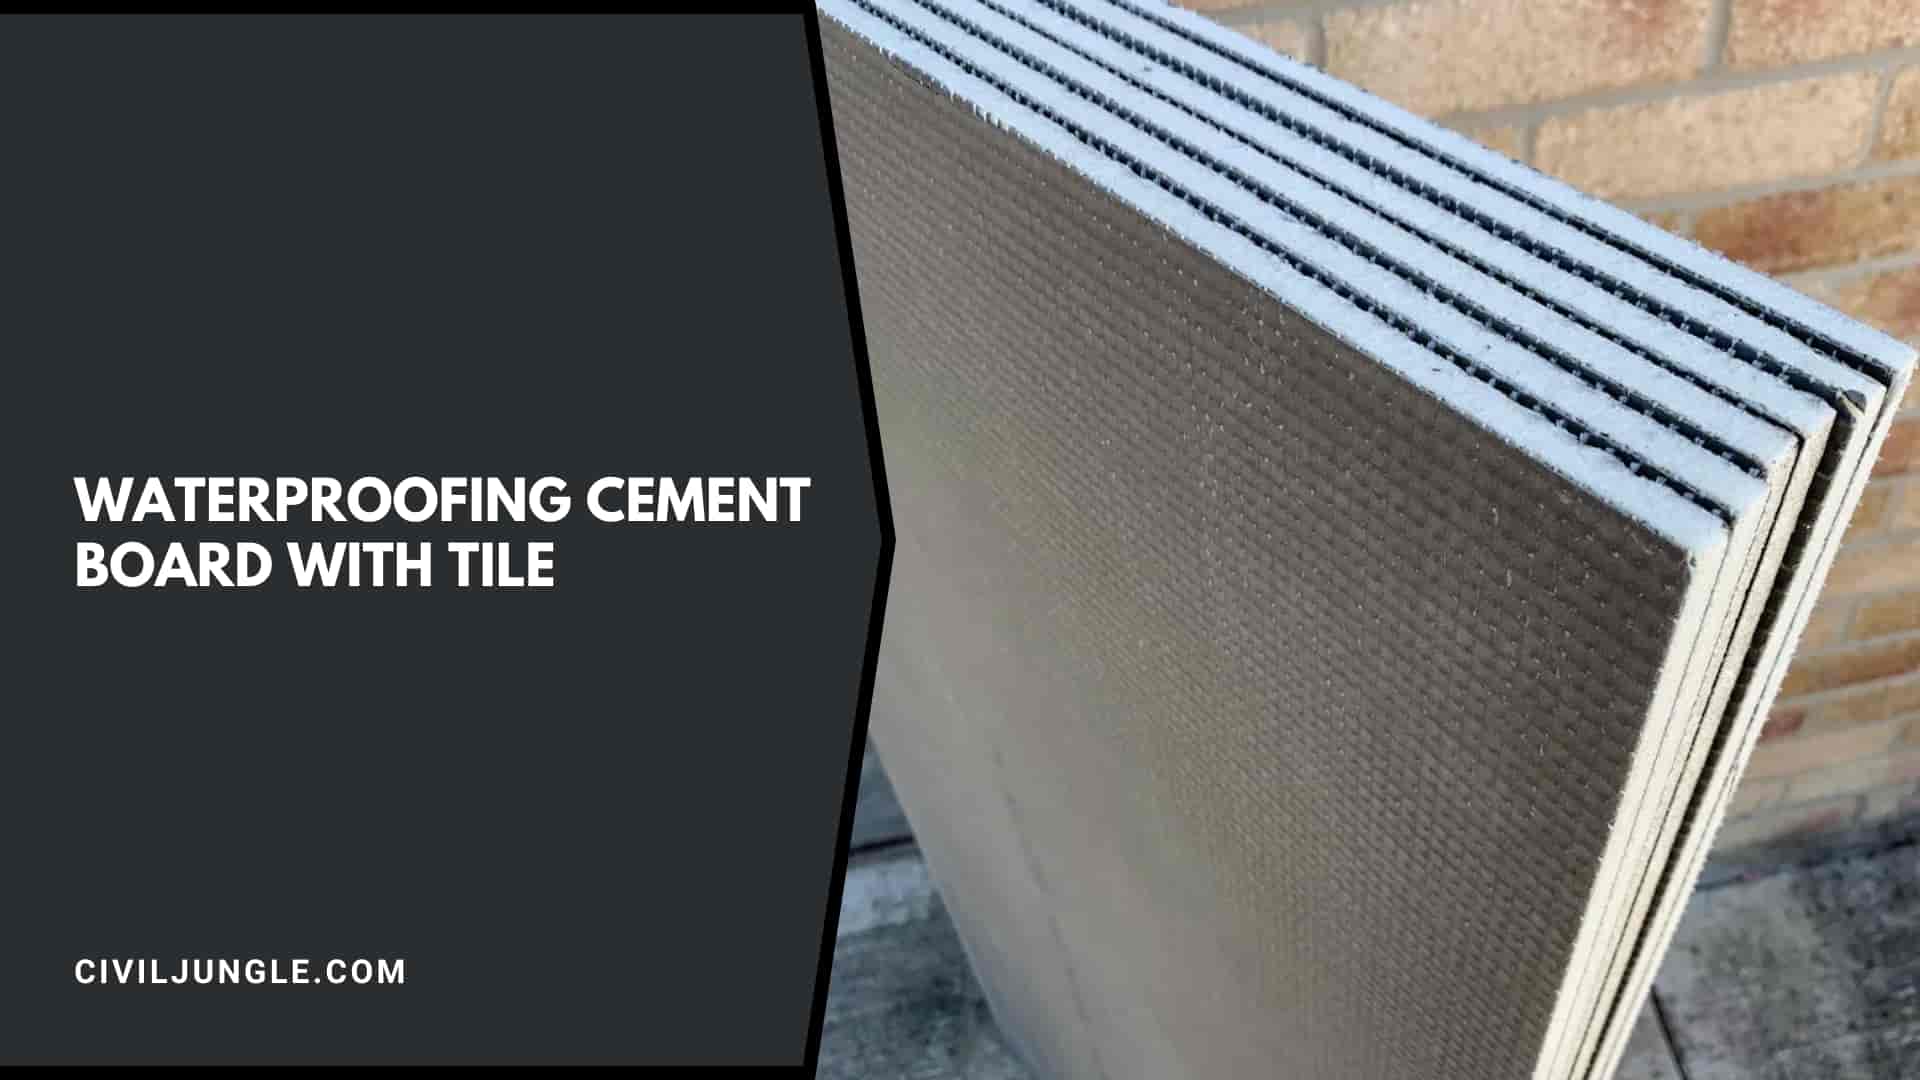 Waterproofing Cement Board with Tile